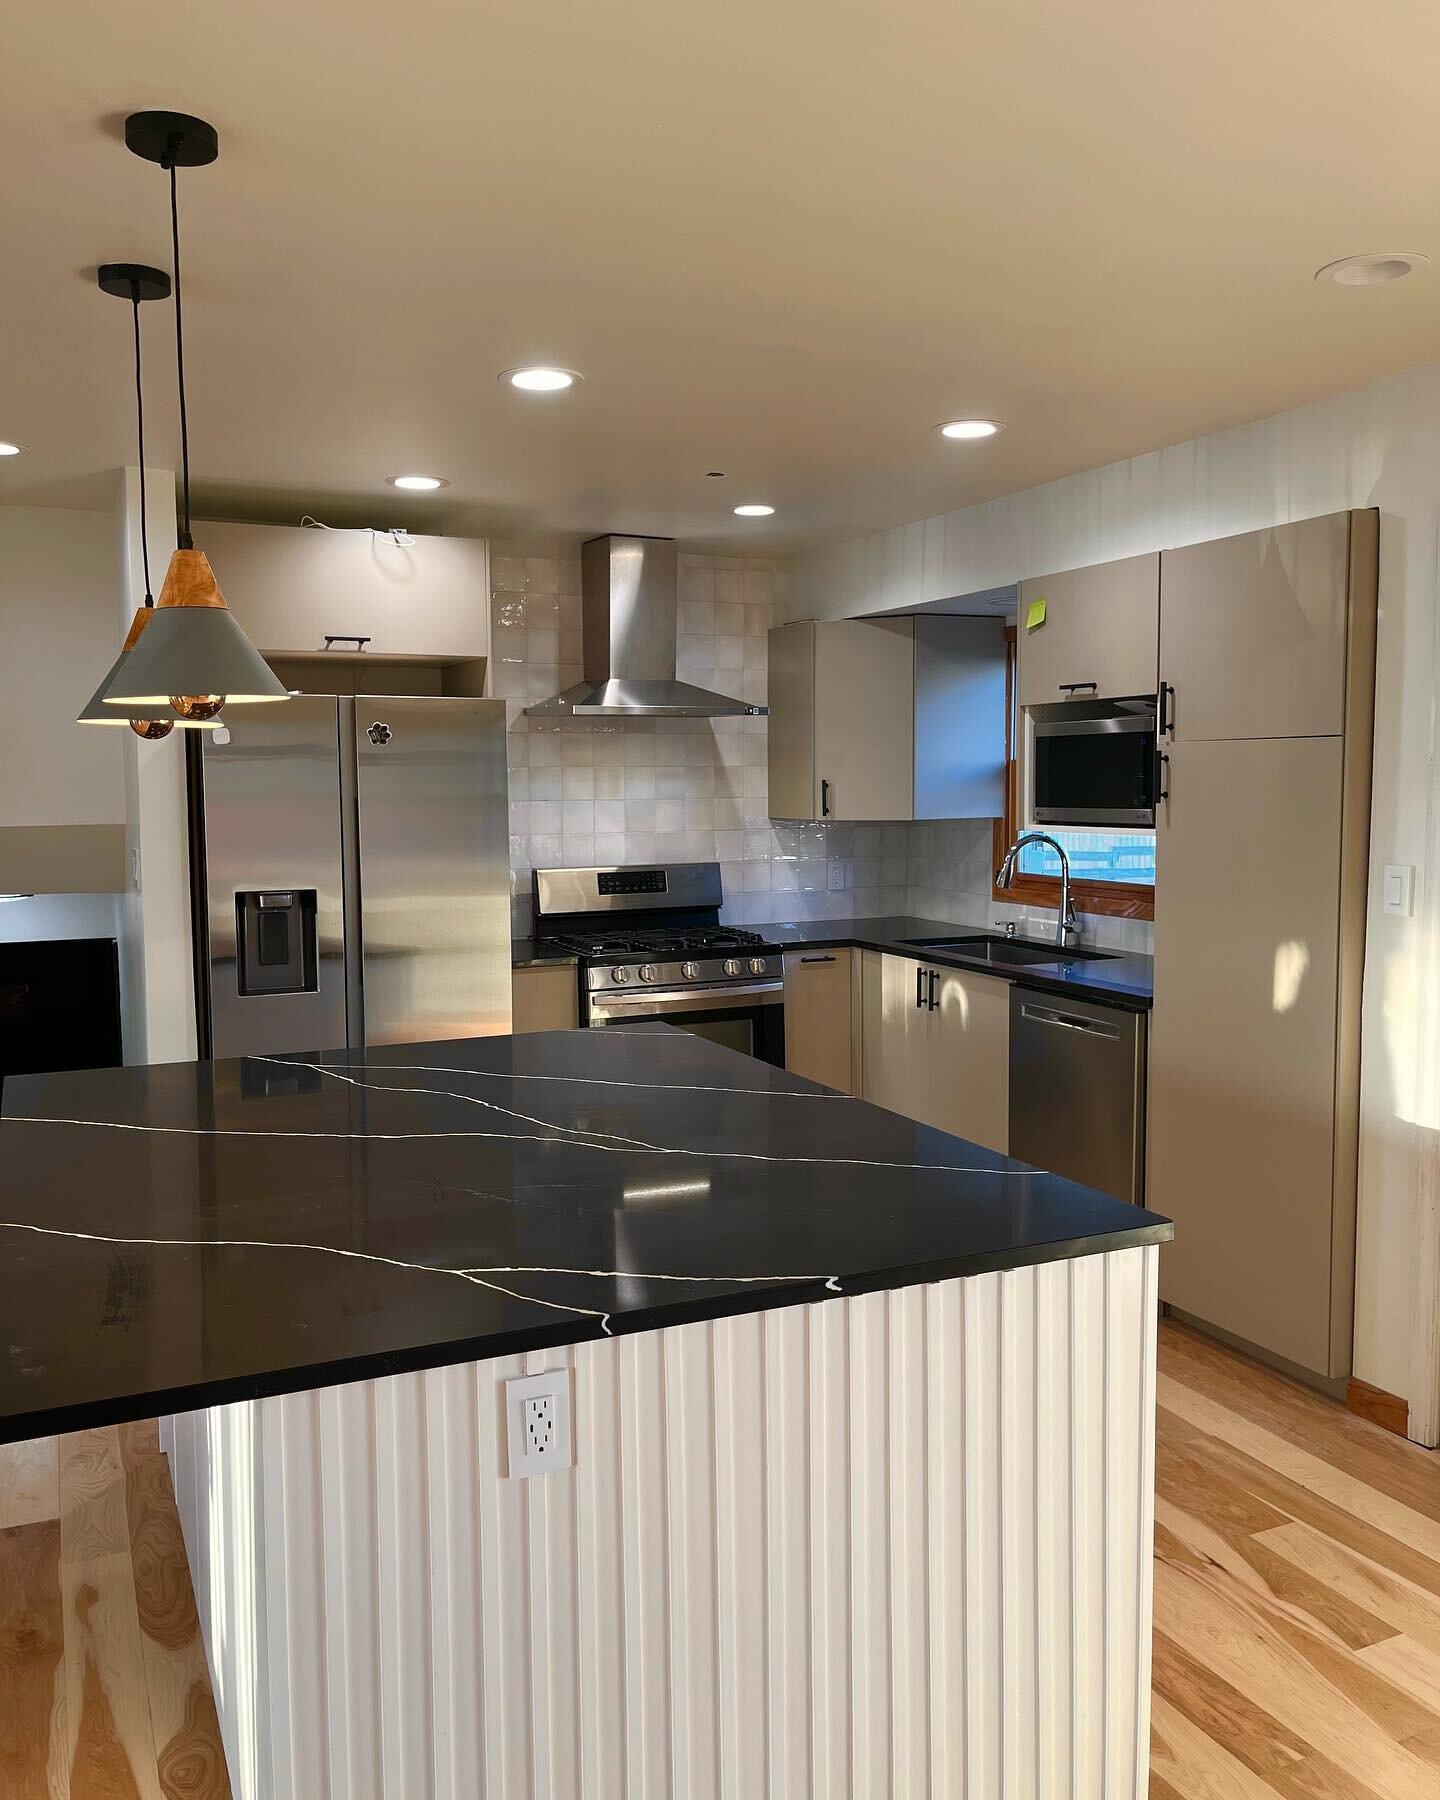 Kitchen remodel! Yours is just one call away...
-
-
-
-
-
-
#diy #diyhomedecor #lakecountyindiana #remodeling #renovationproject #kitchen #interiordesign #homedecor #mykitchen #houseflipping #interior #architecture #painting #countertops #design #hom